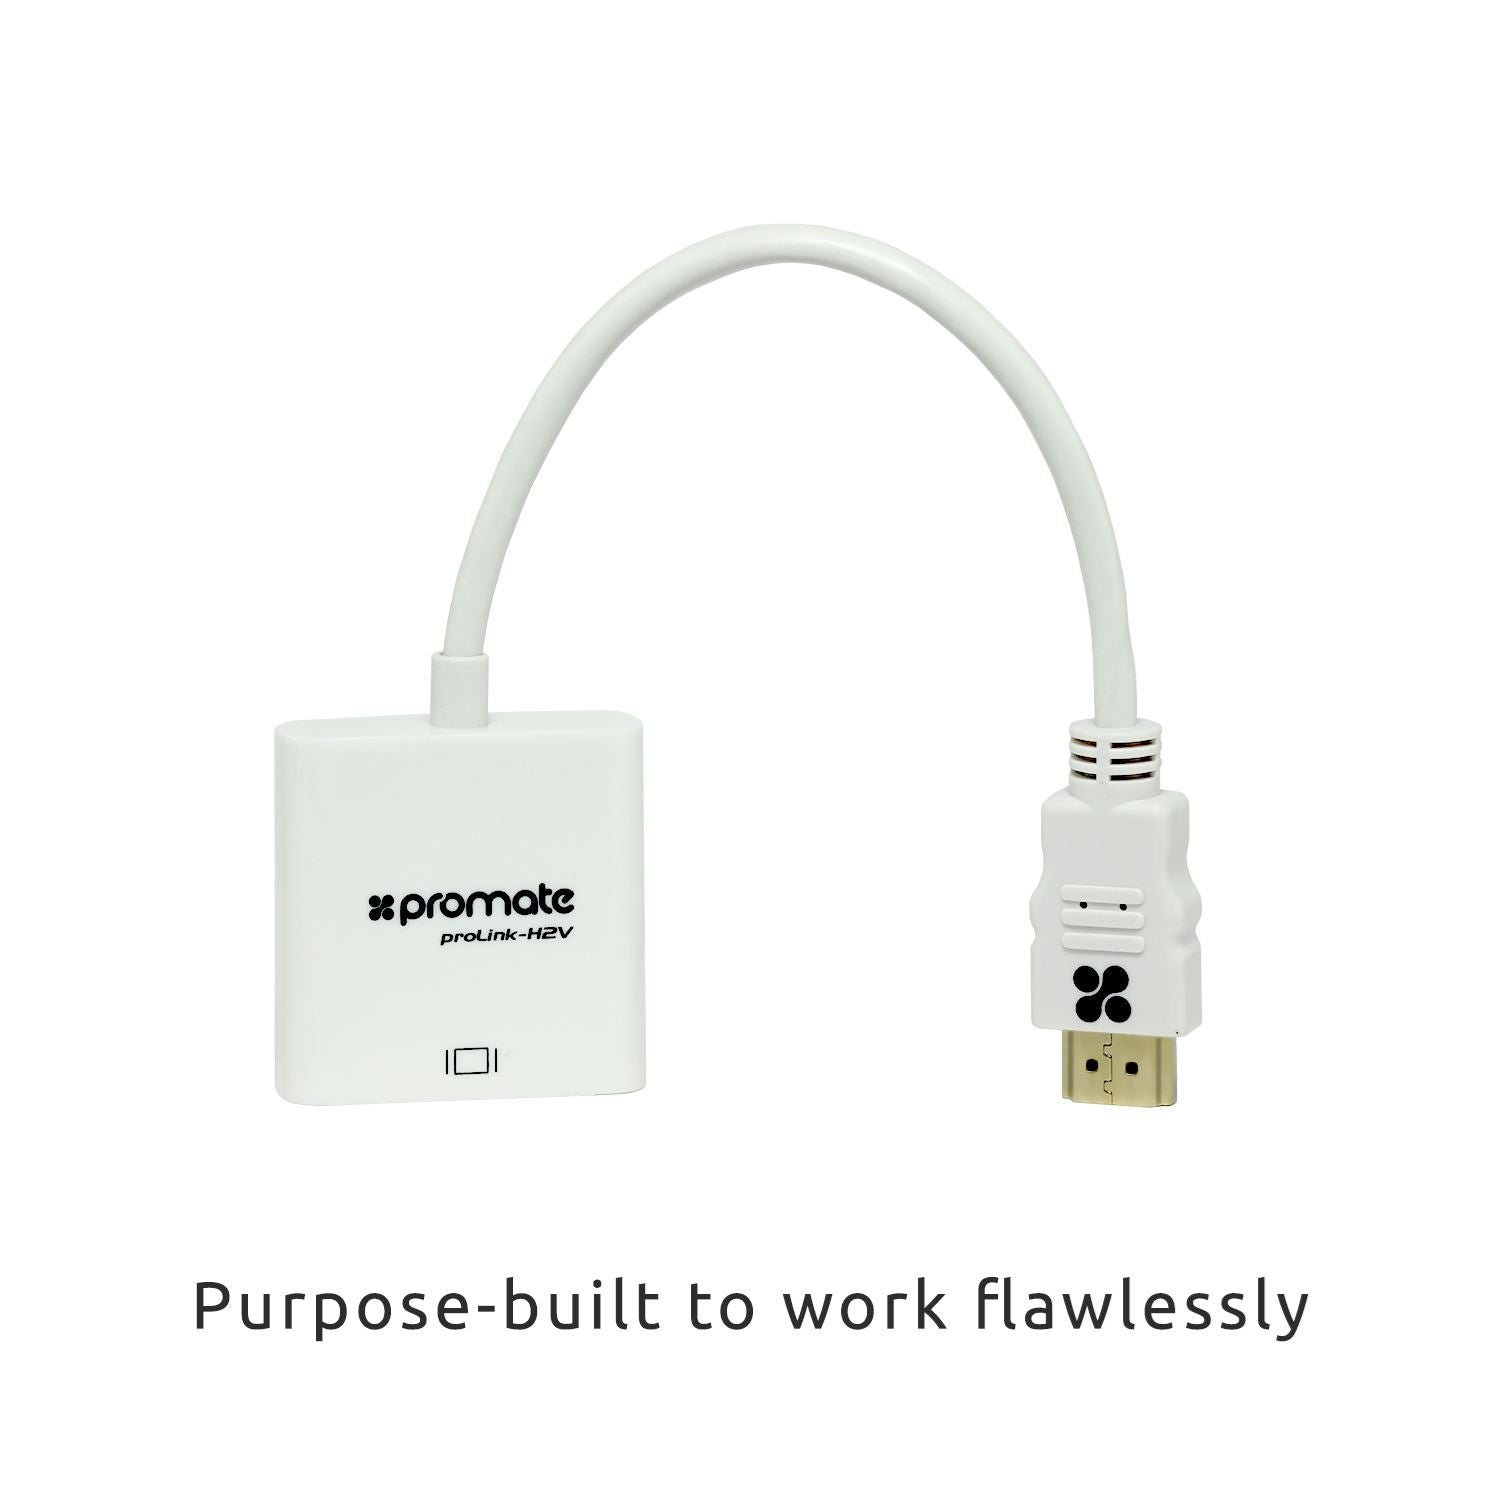 PROMATE_HDMI_(Male)_to_VGA_(Female)_Display_Adaptor_Kit._Supports_up_to_1920x1080@60Hz._Gold-Plated_HDMI_Connector._Supports_both_Windows_&_Mac._White_Colour. 1720